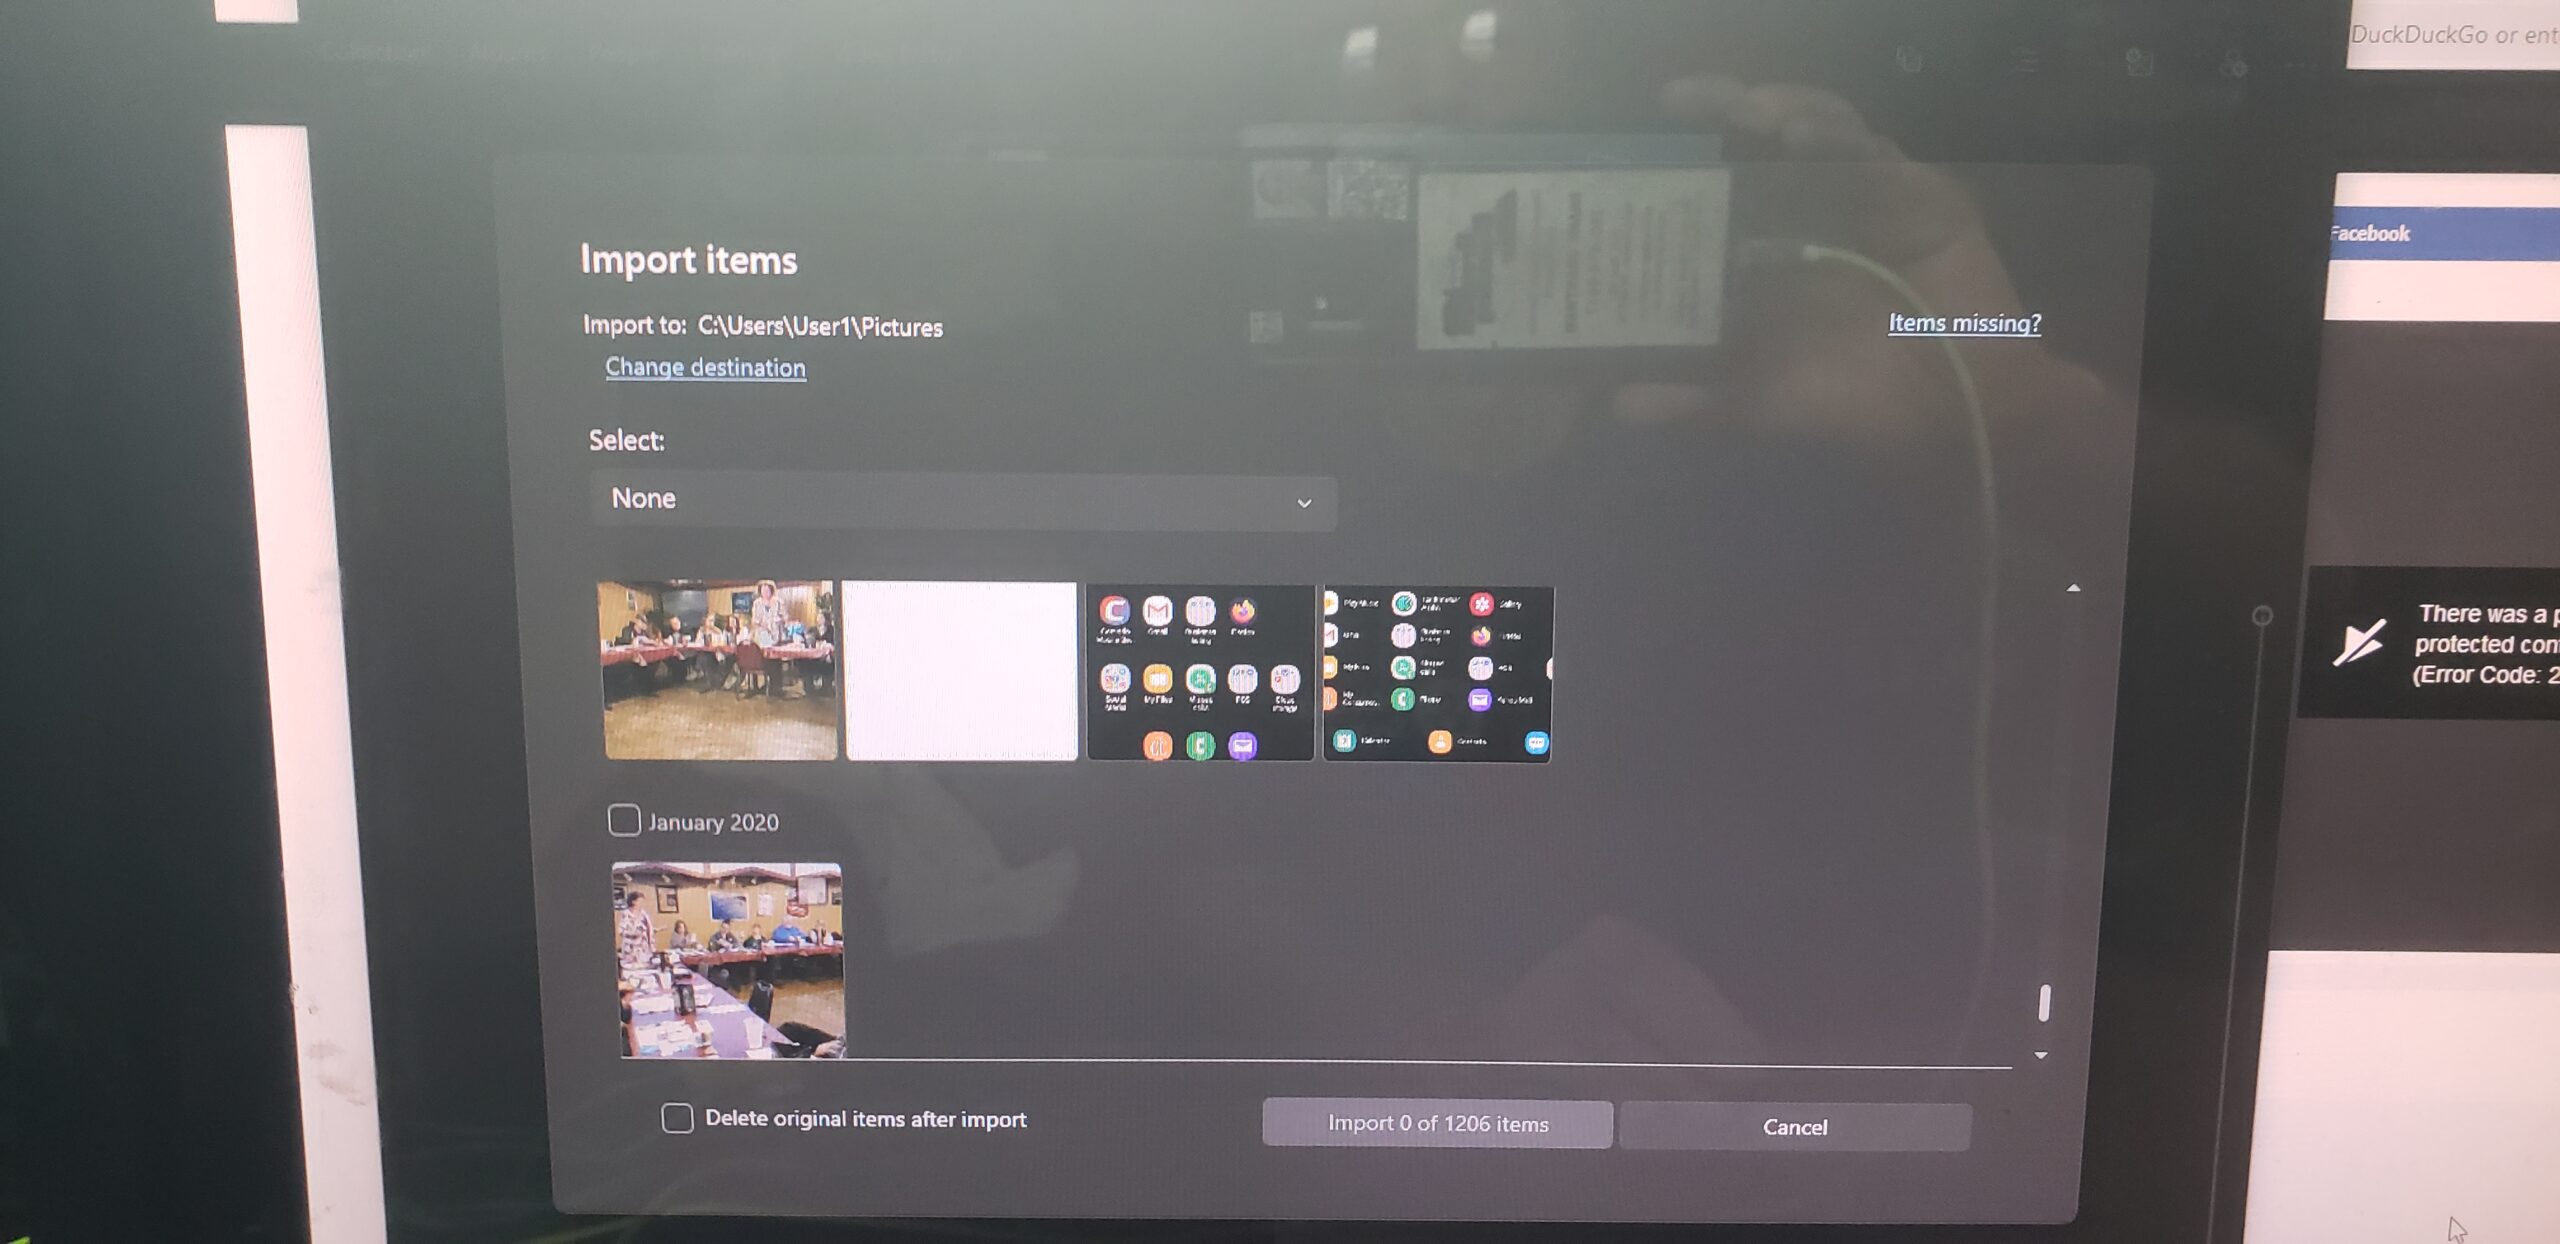 Windows 10’s import pictures feature